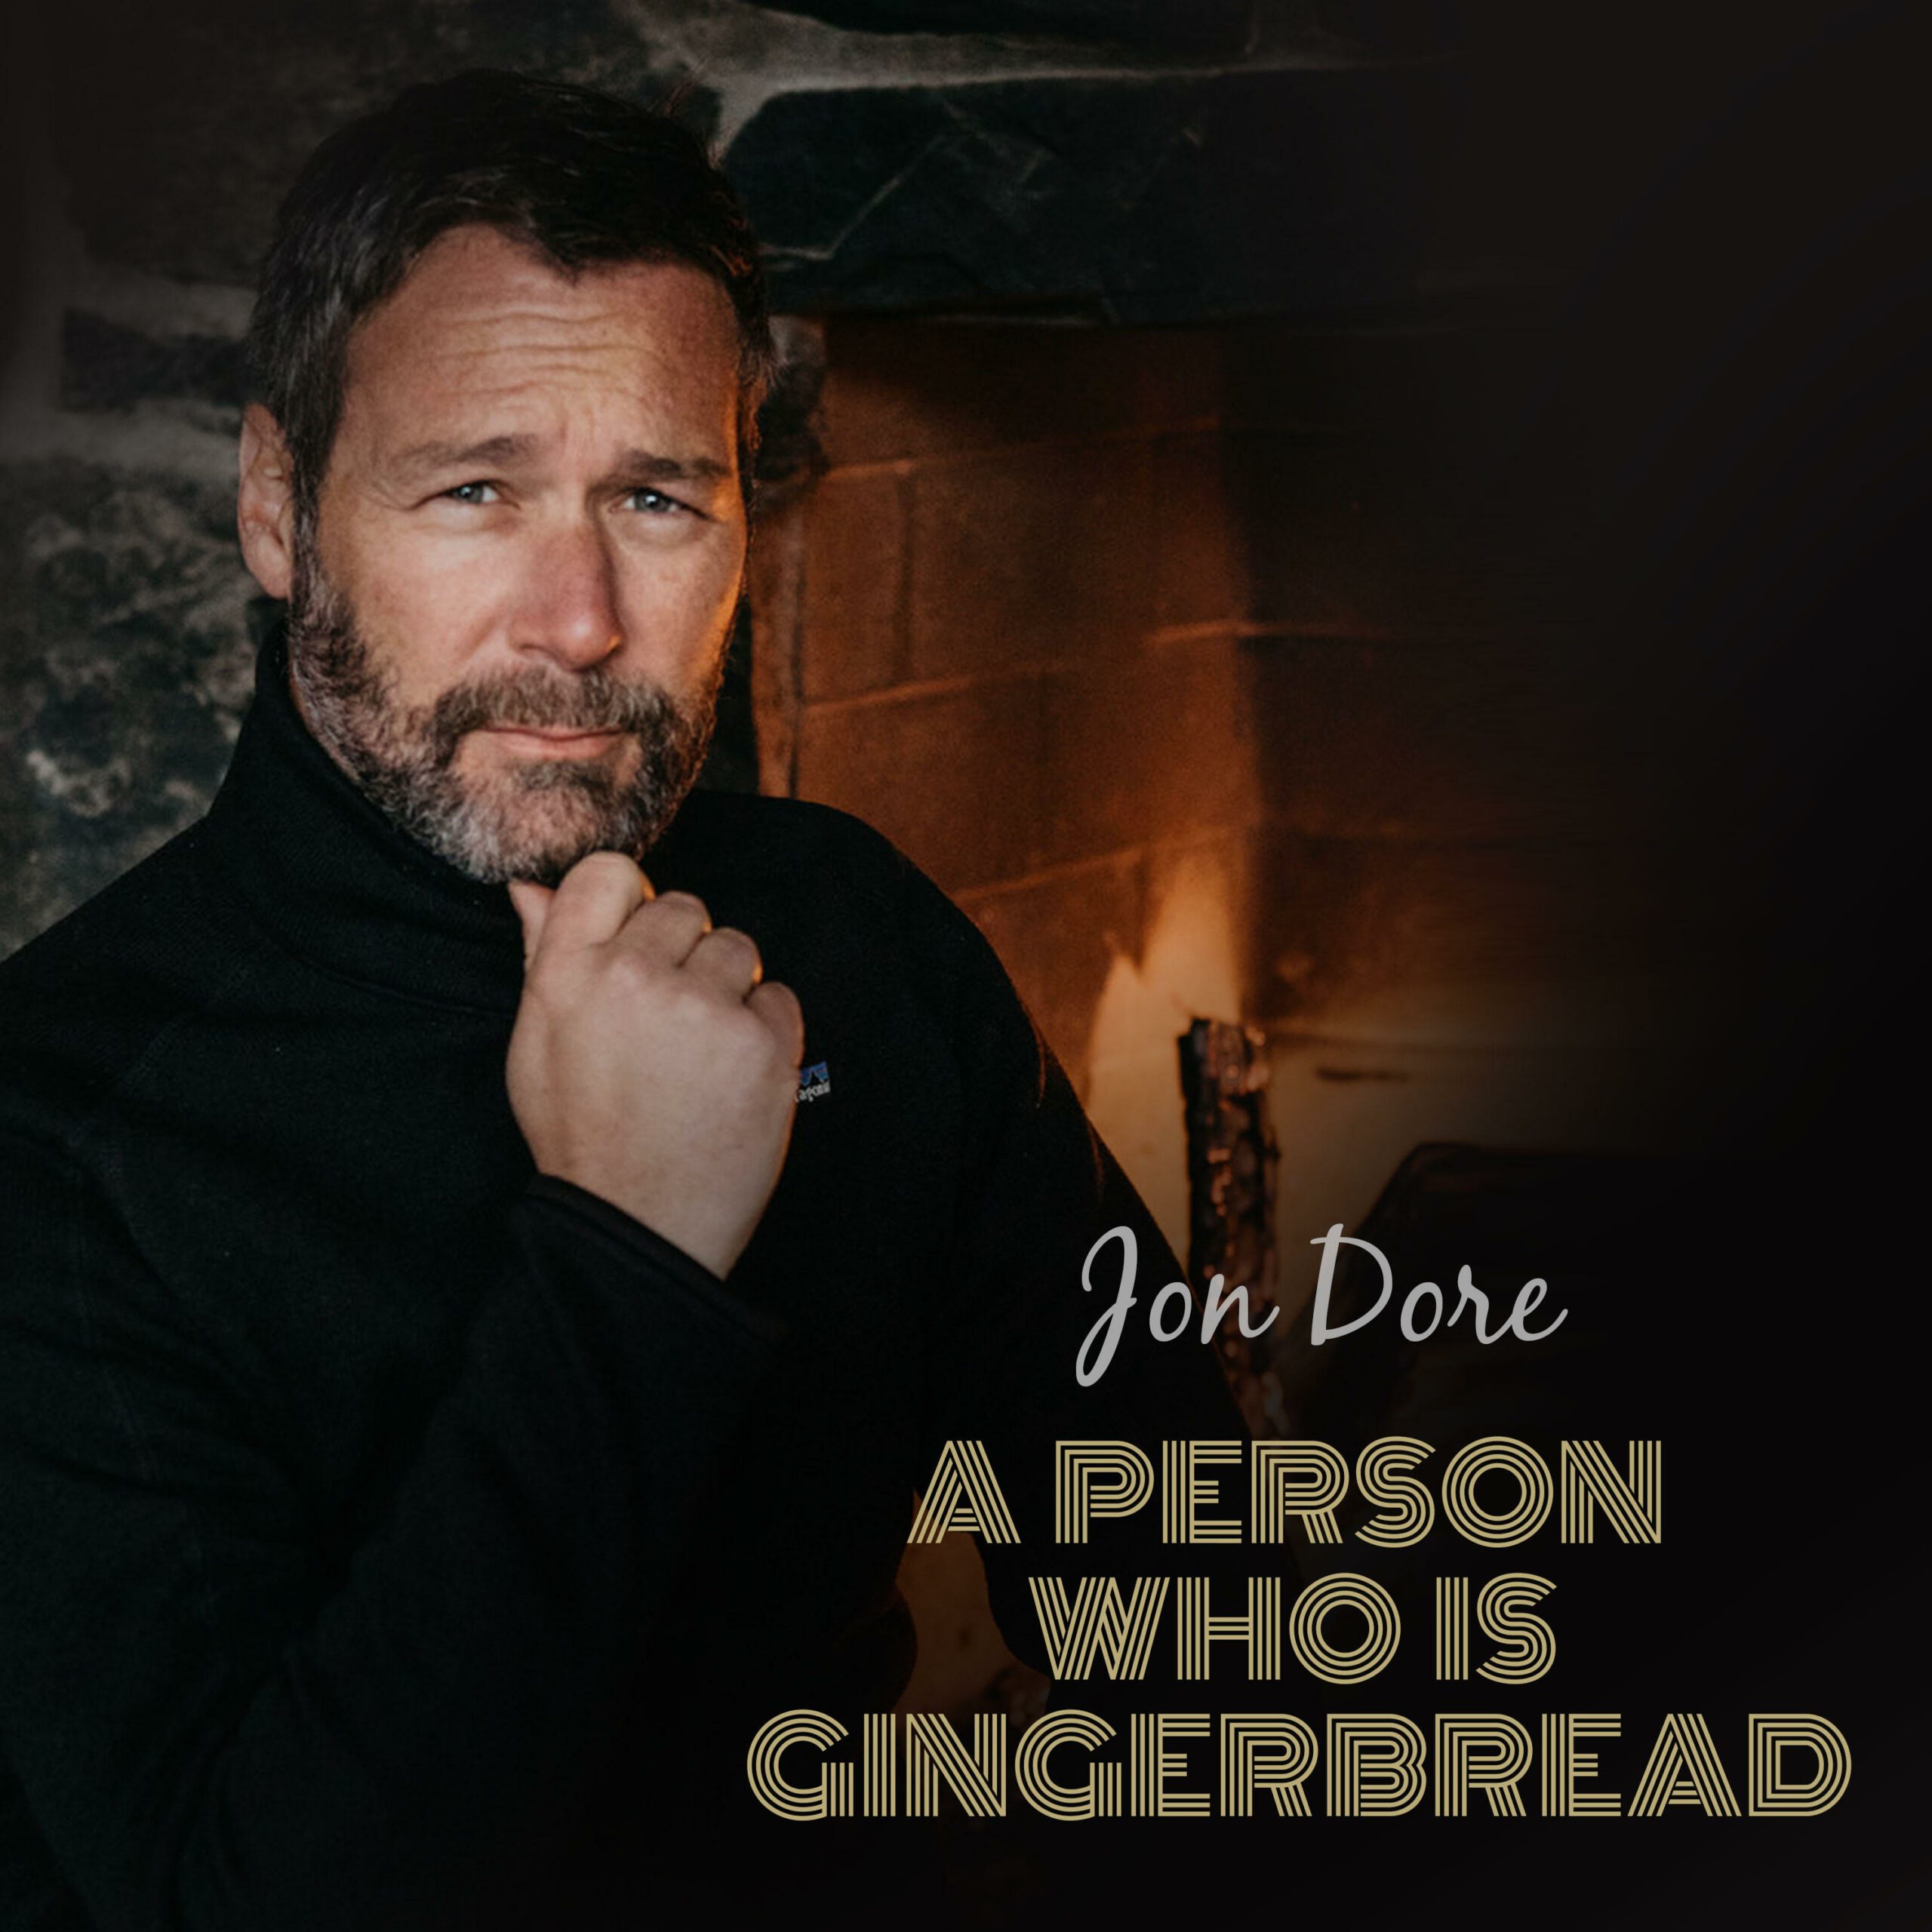 A Person Who Is Gingerbread - Jon Dore